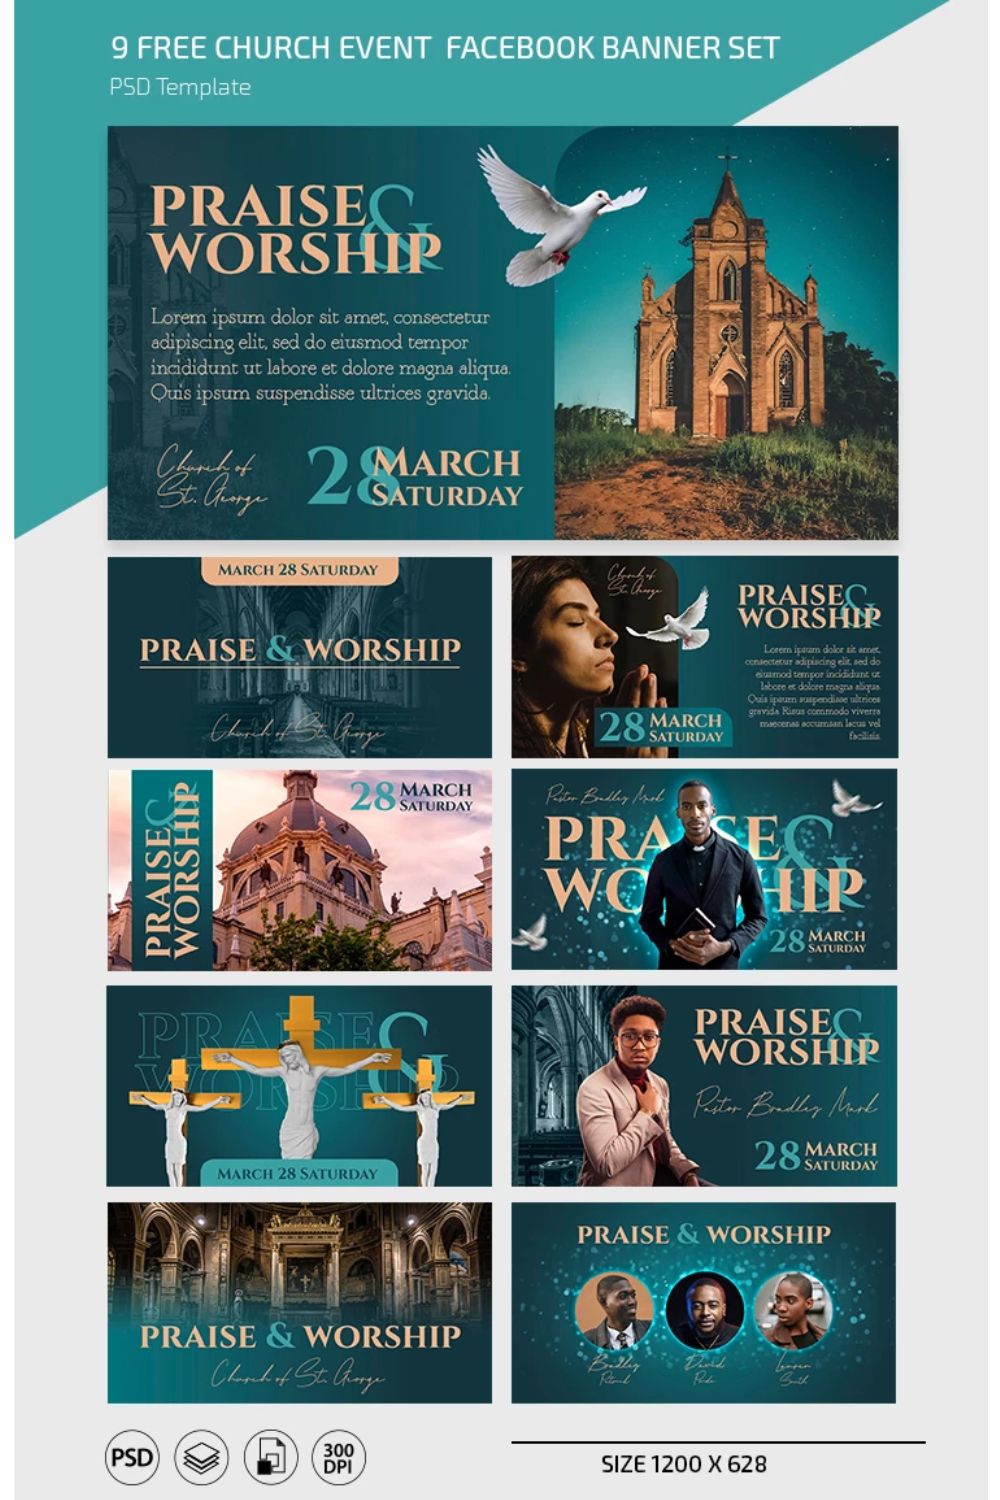 CHURCH EVENT FACEBOOK BANNER SET IN PSD pinterest preview image.